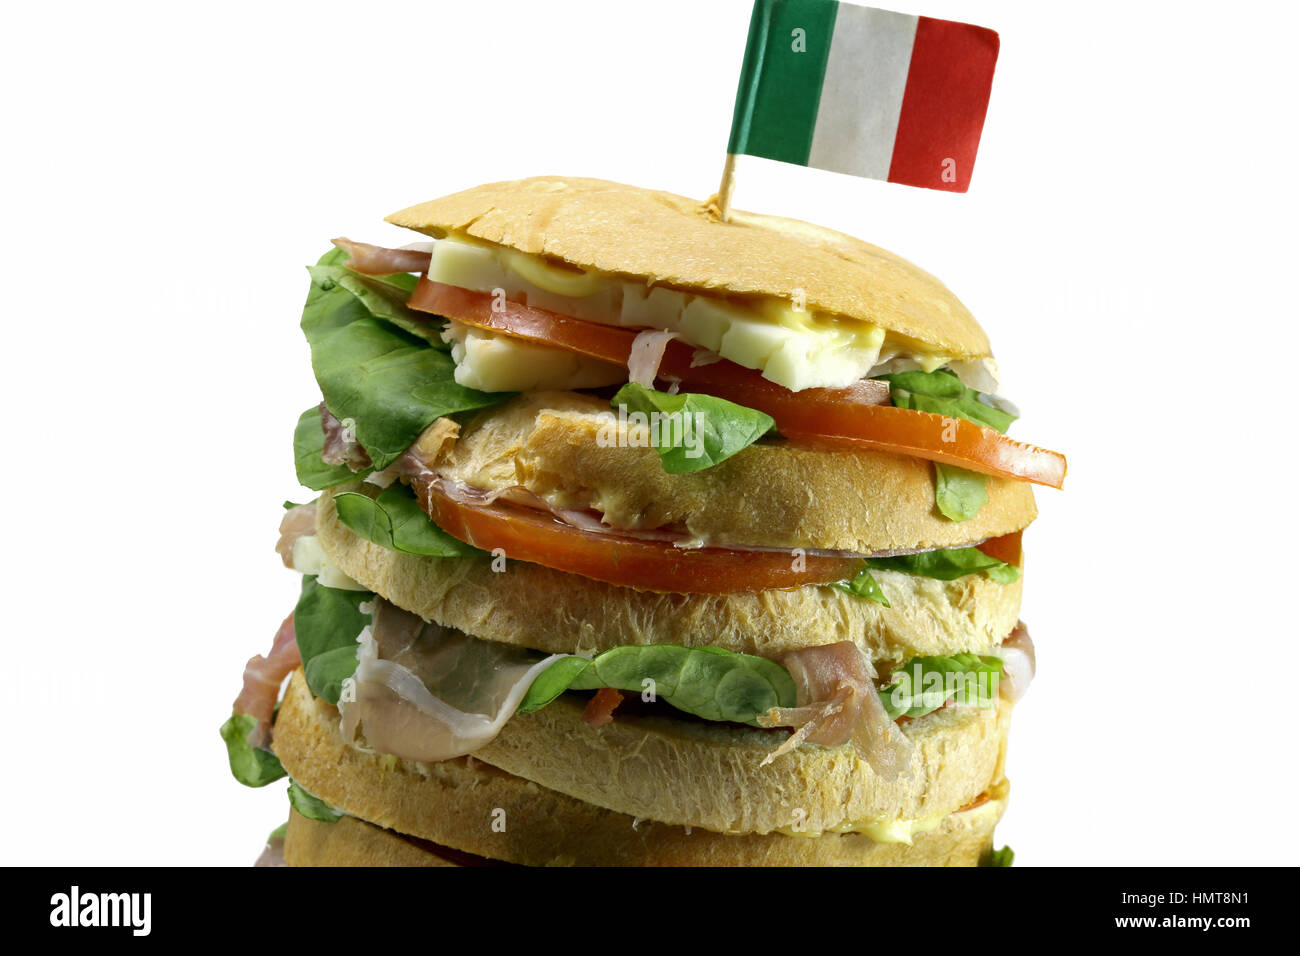 gourmet stuffed sandwich called Panettone Gastronomic with many layers of salami cheese and tomatoes typical Italian appetizer and the italian flag Stock Photo